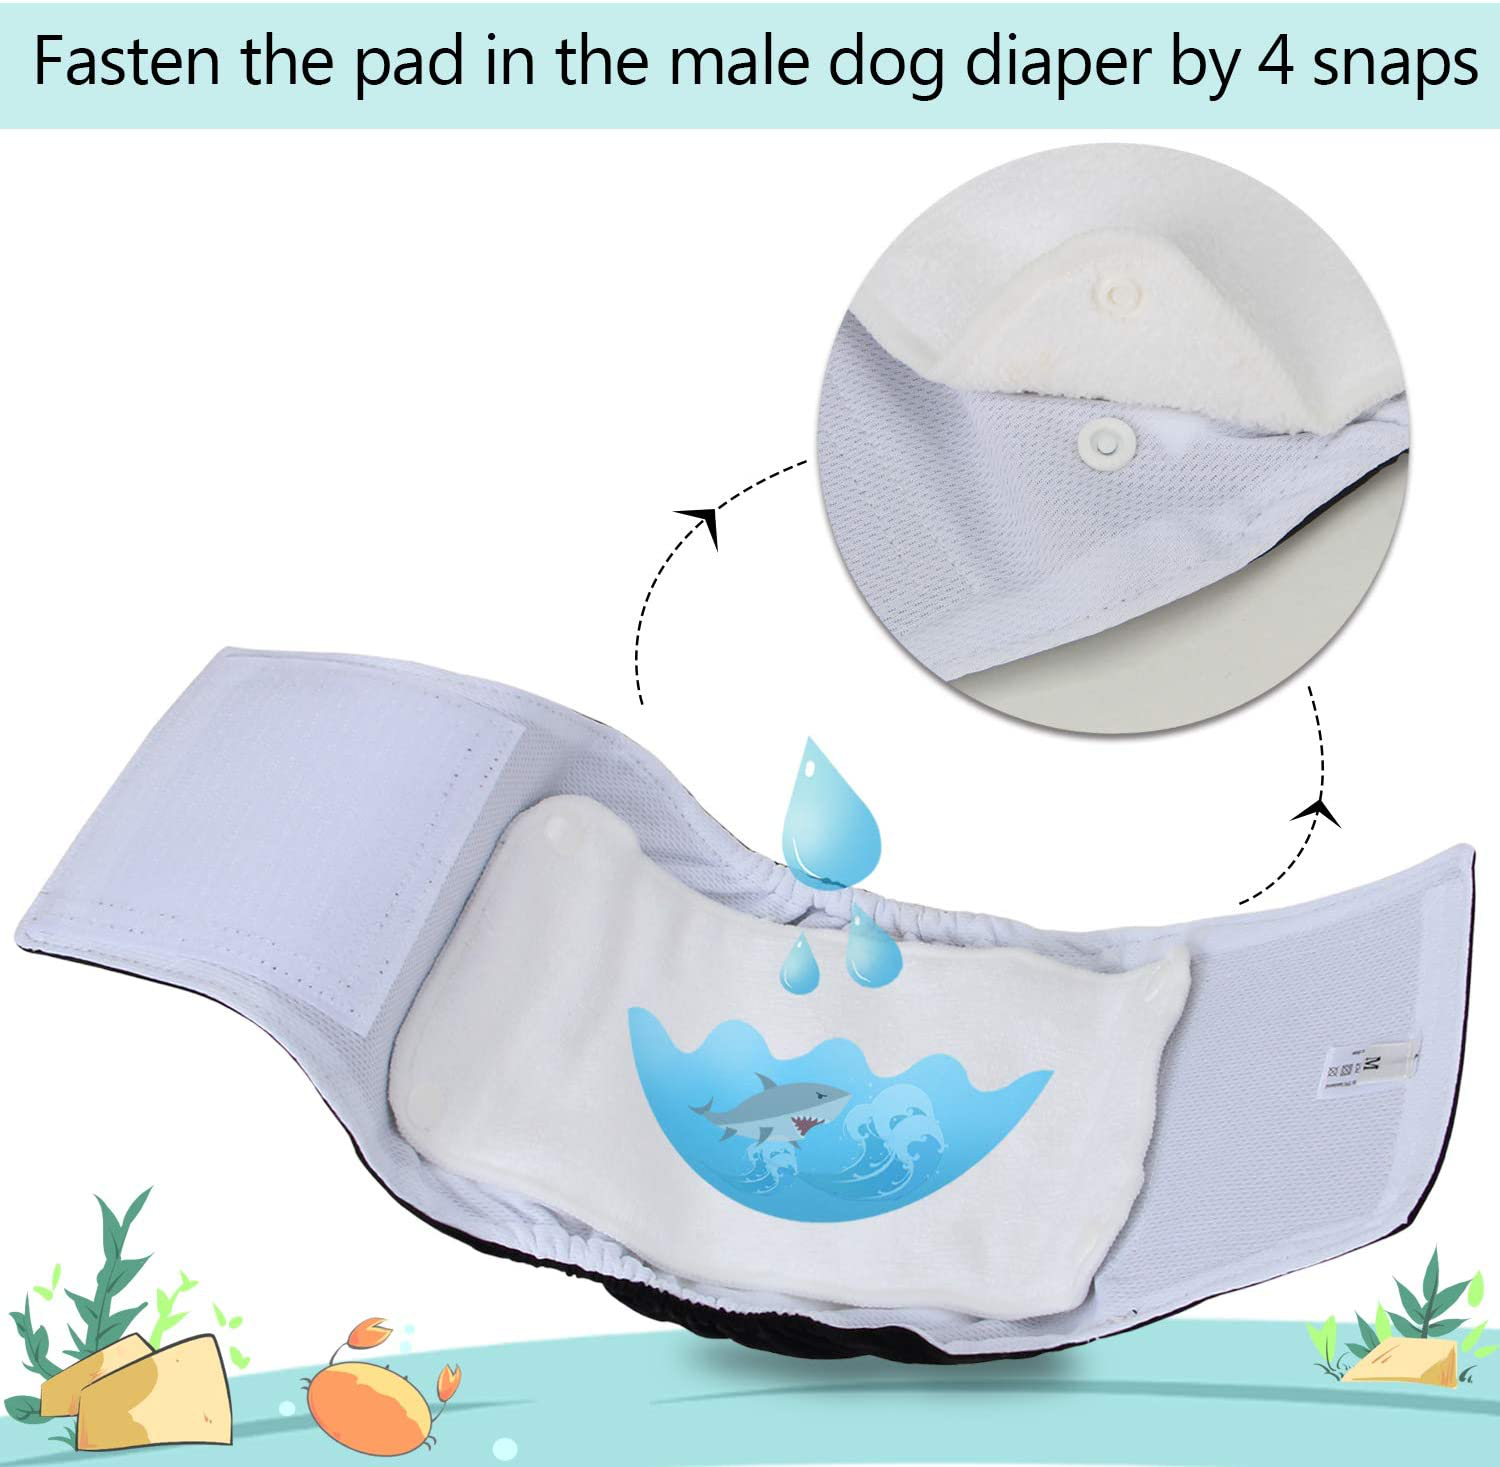 LUXJA Reusable Male Dog Diaper Pads (6 Pack)